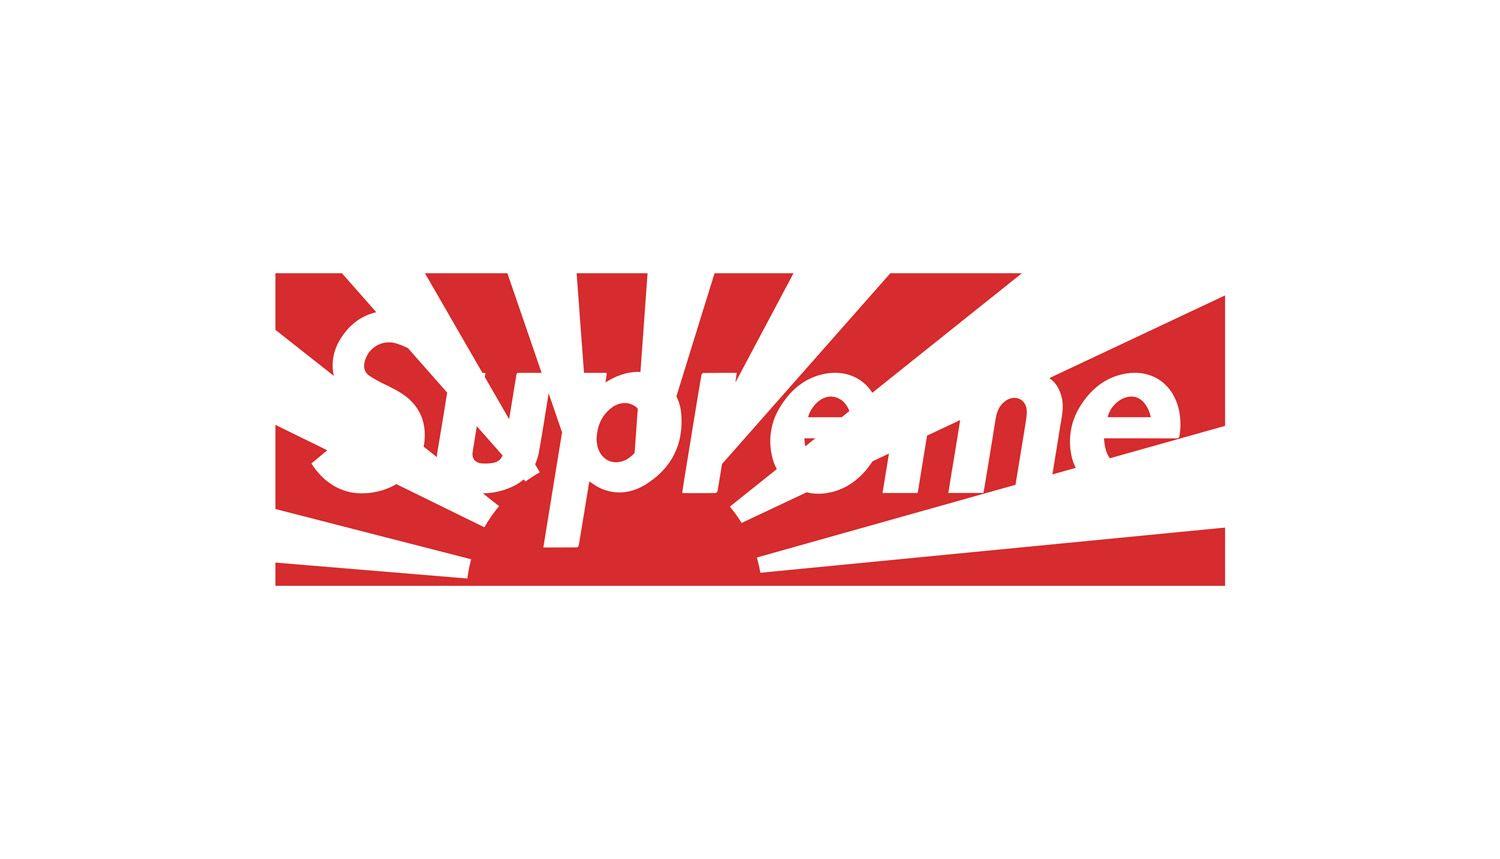 Supreme Cool Rap Logo - The 19 Most Obscure Supreme Box Logo Tees | Highsnobiety